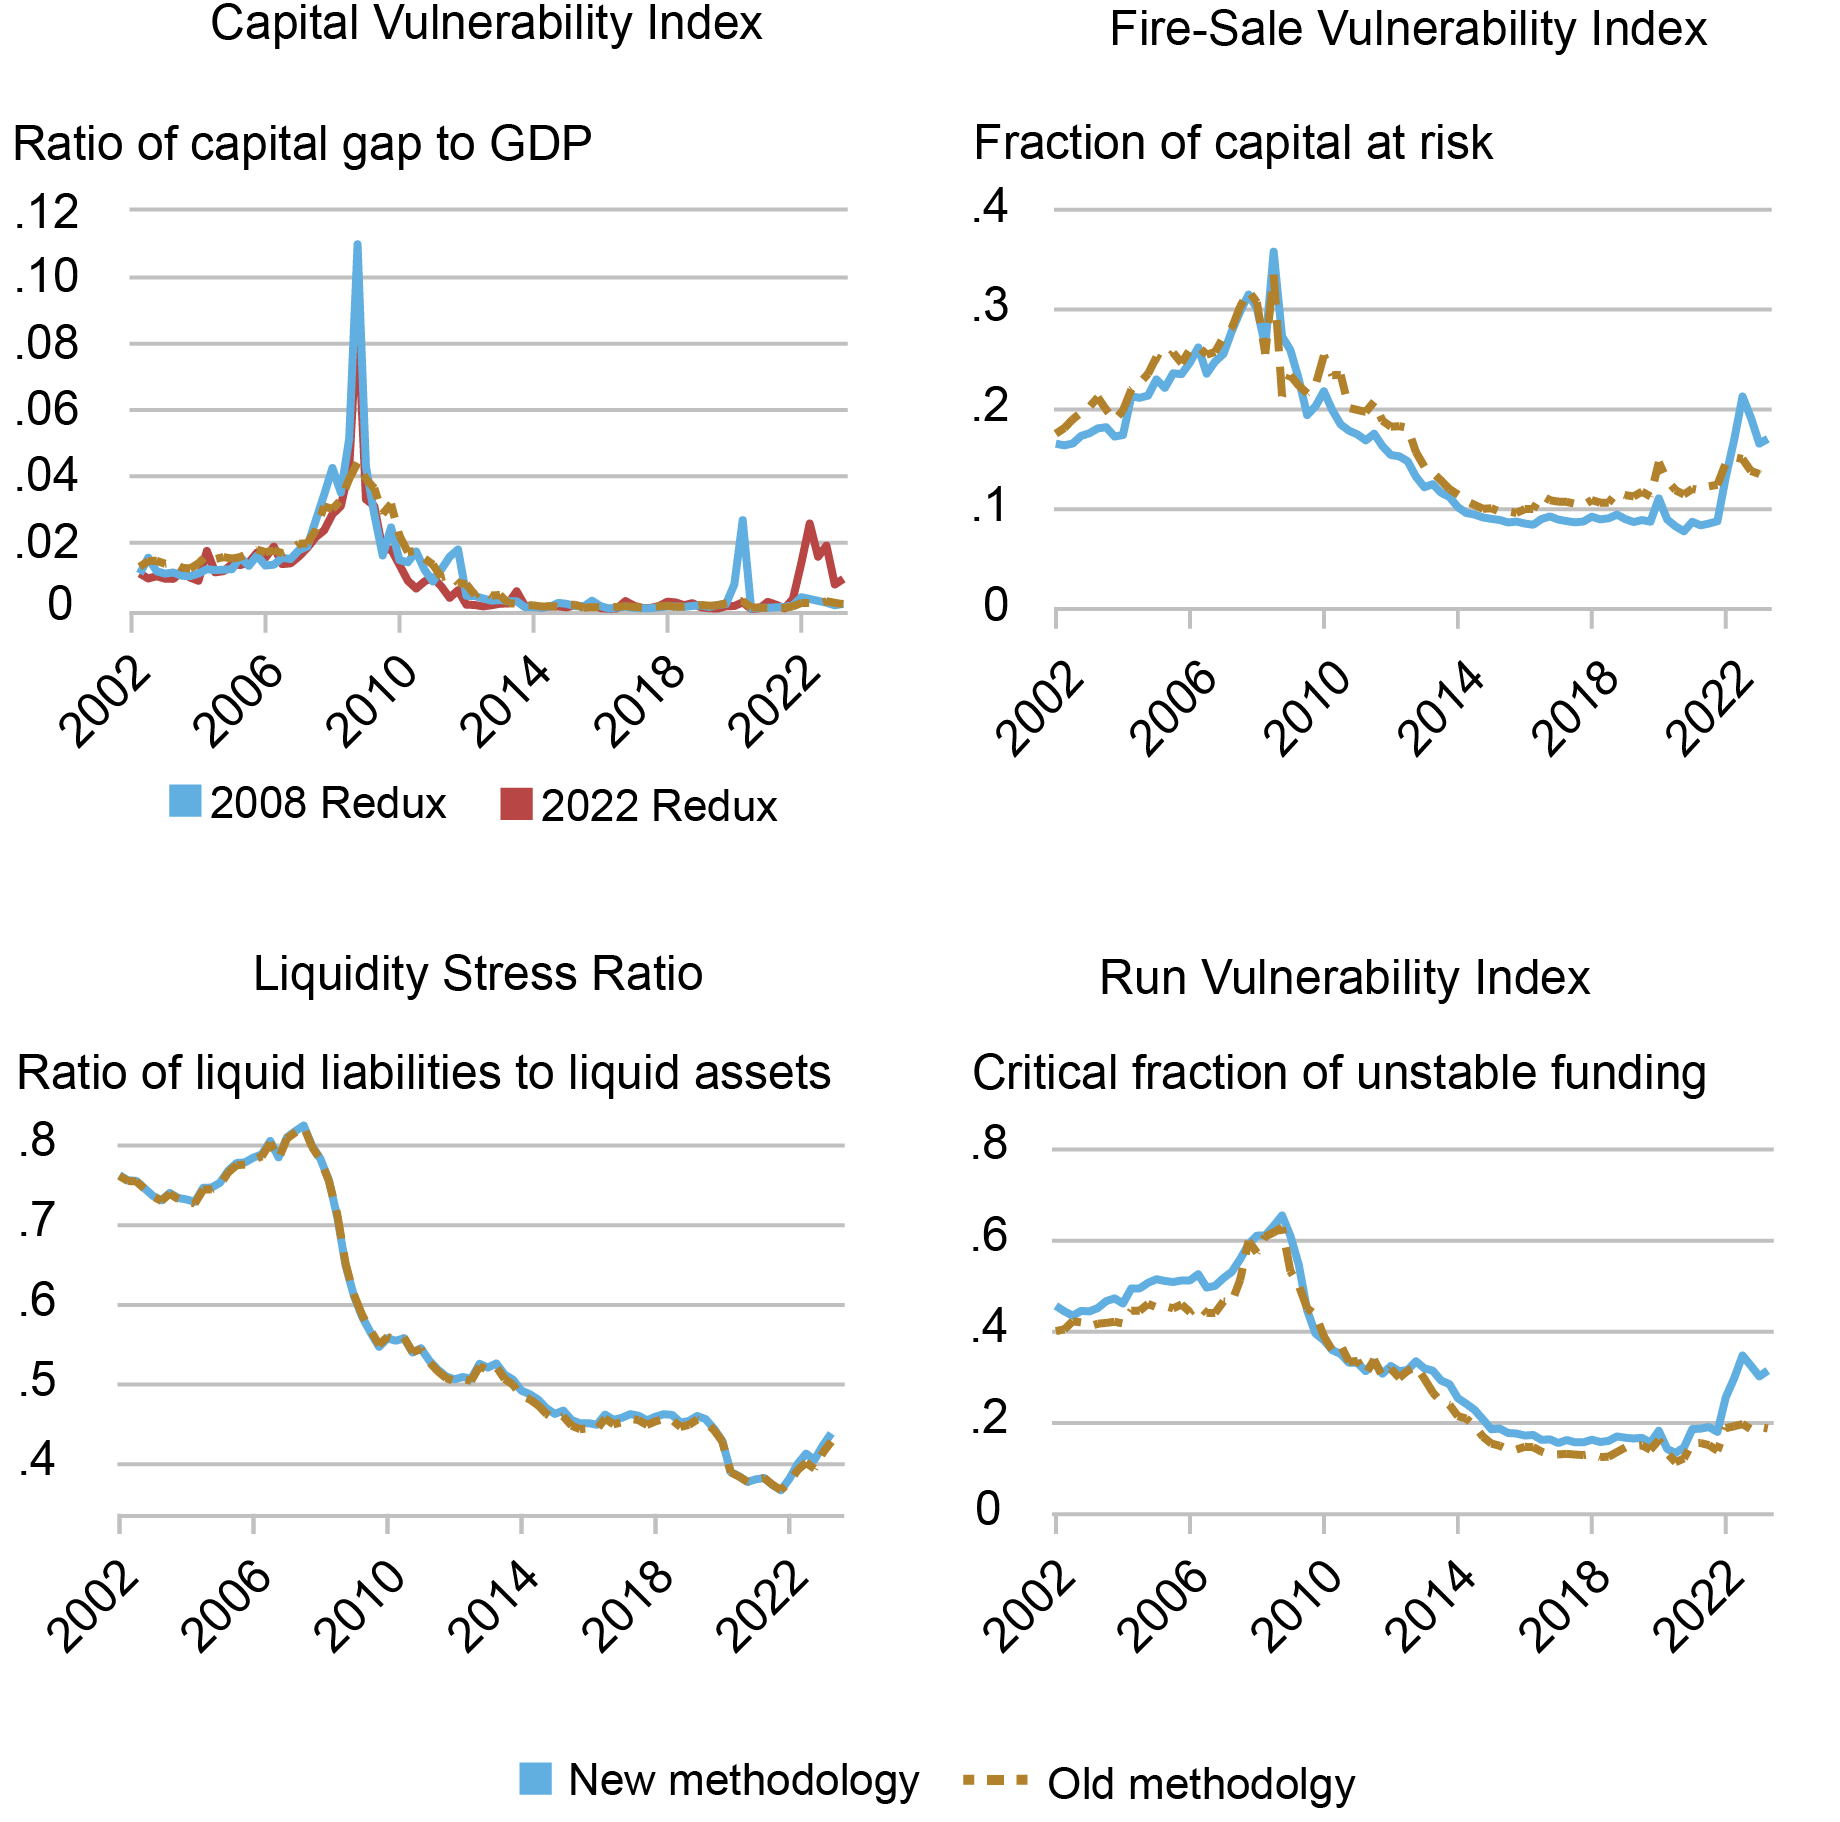 Four-panel Liberty Street Economics line chart comparing the new and old methodologies of the four measures of vulnerability—Capital Vulnerability Index, Fire-Sale Vulnerability Index, Liquidity Stress Ratio, and Run Vulnerability Index—that were introduced in 2018. 